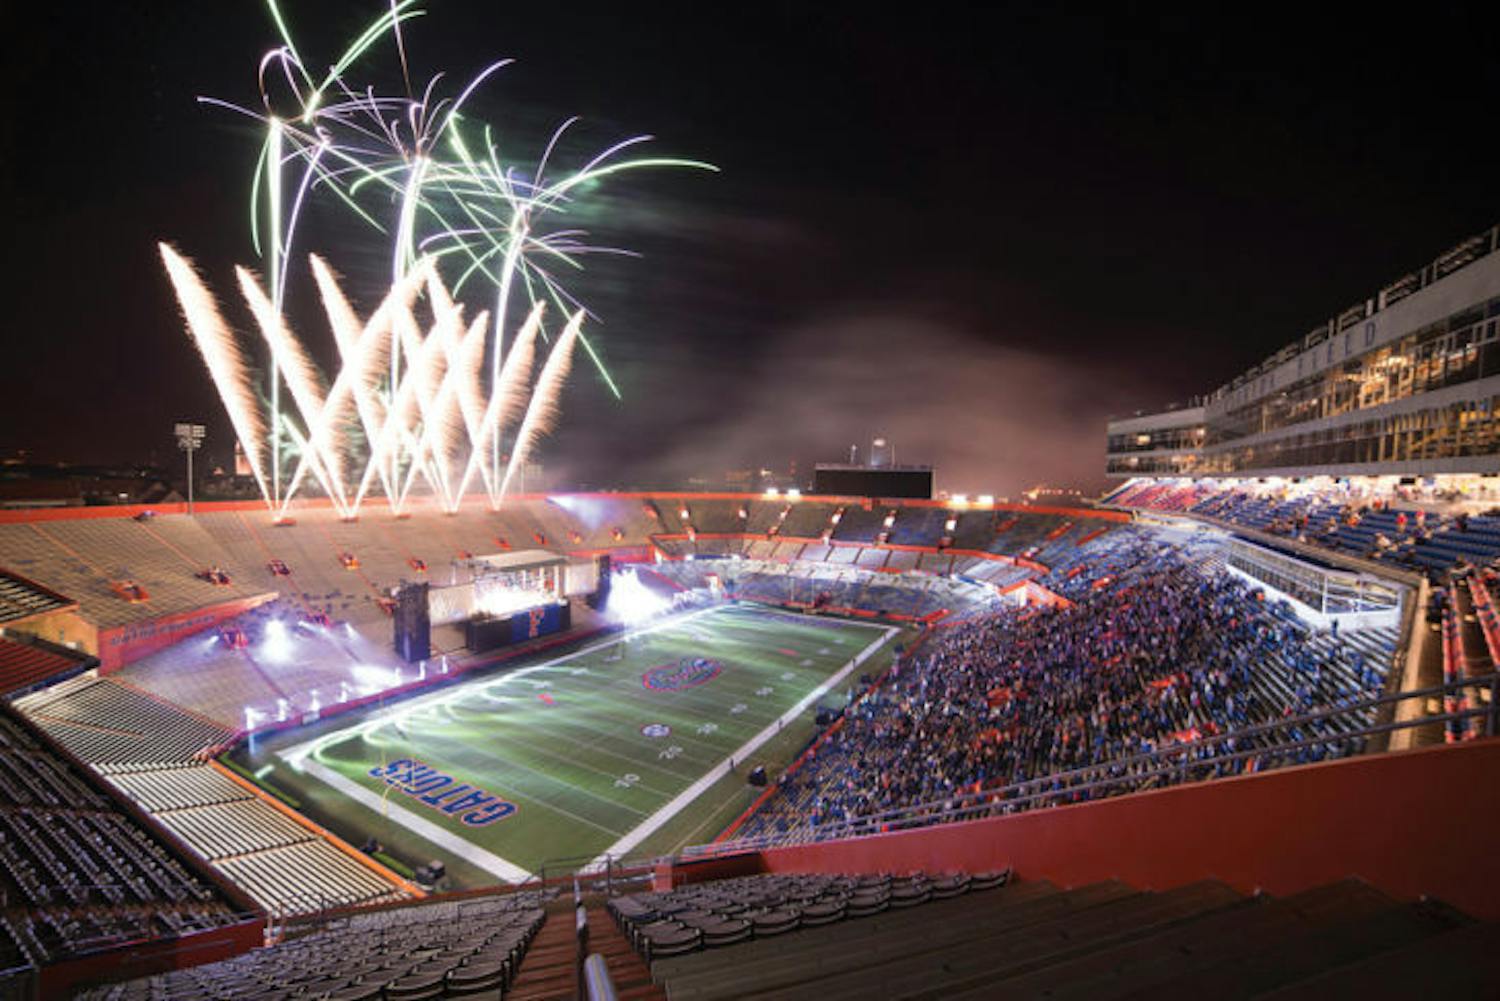 The fireworks finale over Ben Hill Griffin Stadium marks the end of the 90th annual Gator Growl during UF Homecoming Friday evening. The Fray, Sister Hazel and the UF Fightin’ Gator Marching Band performed for students, alumni and guests.